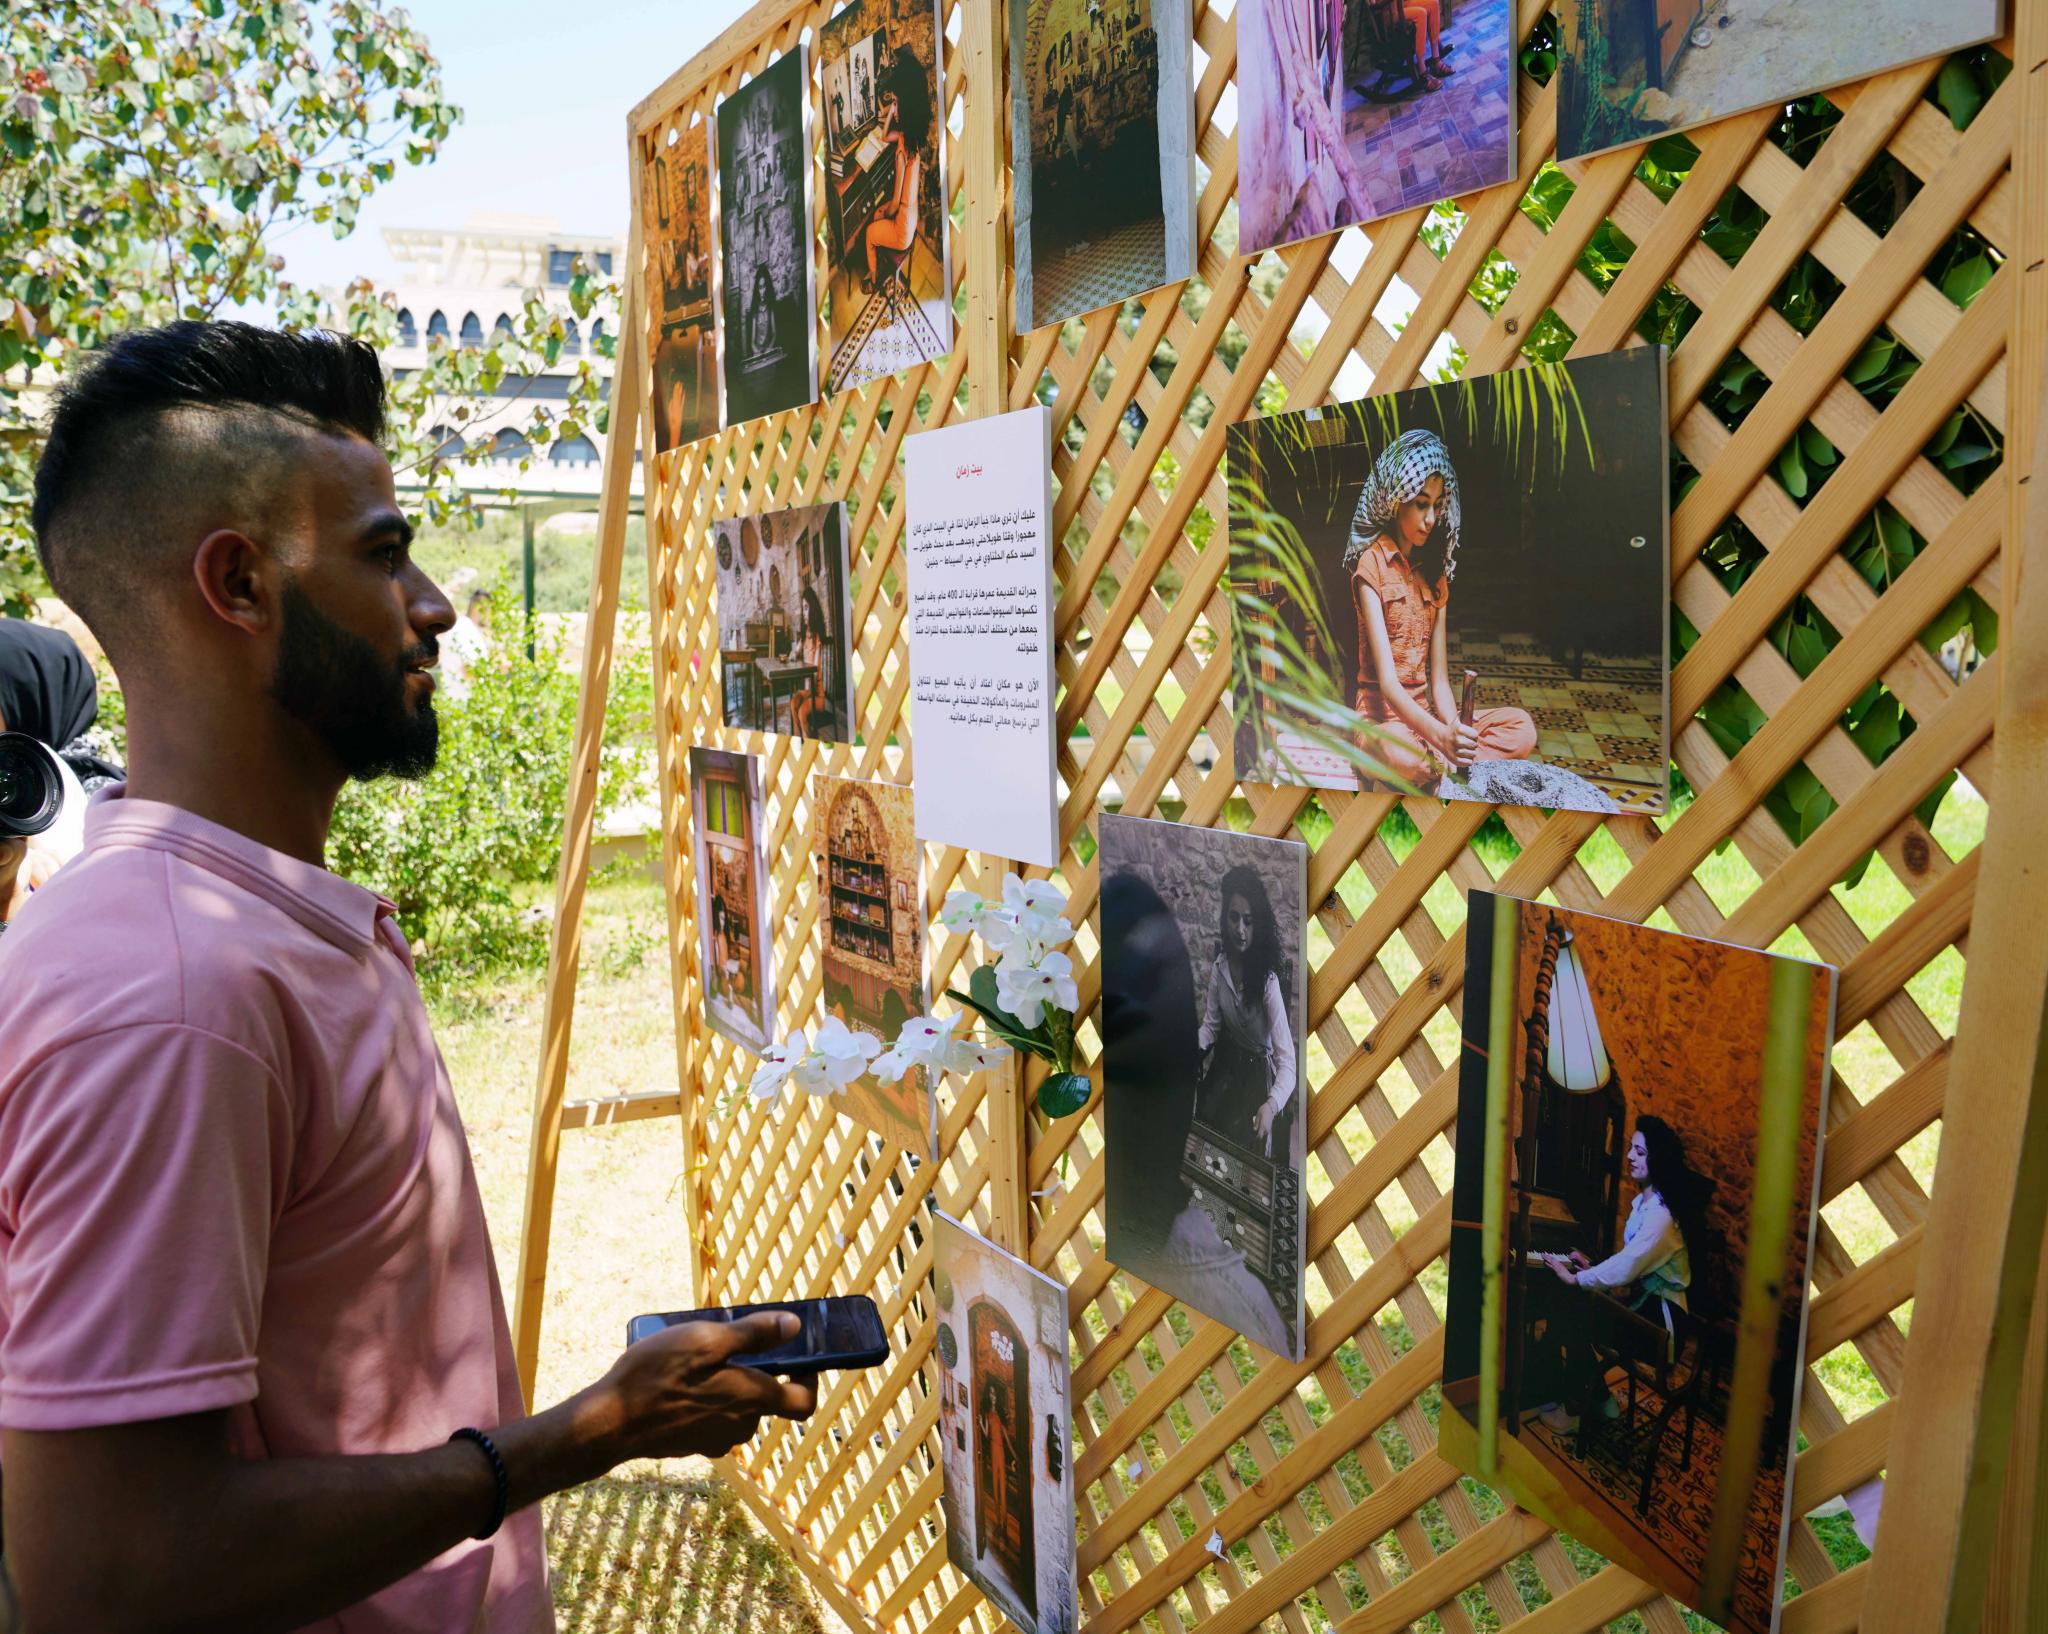 Two Students from the Arabic Language and Media Department Organize a Photo Fair